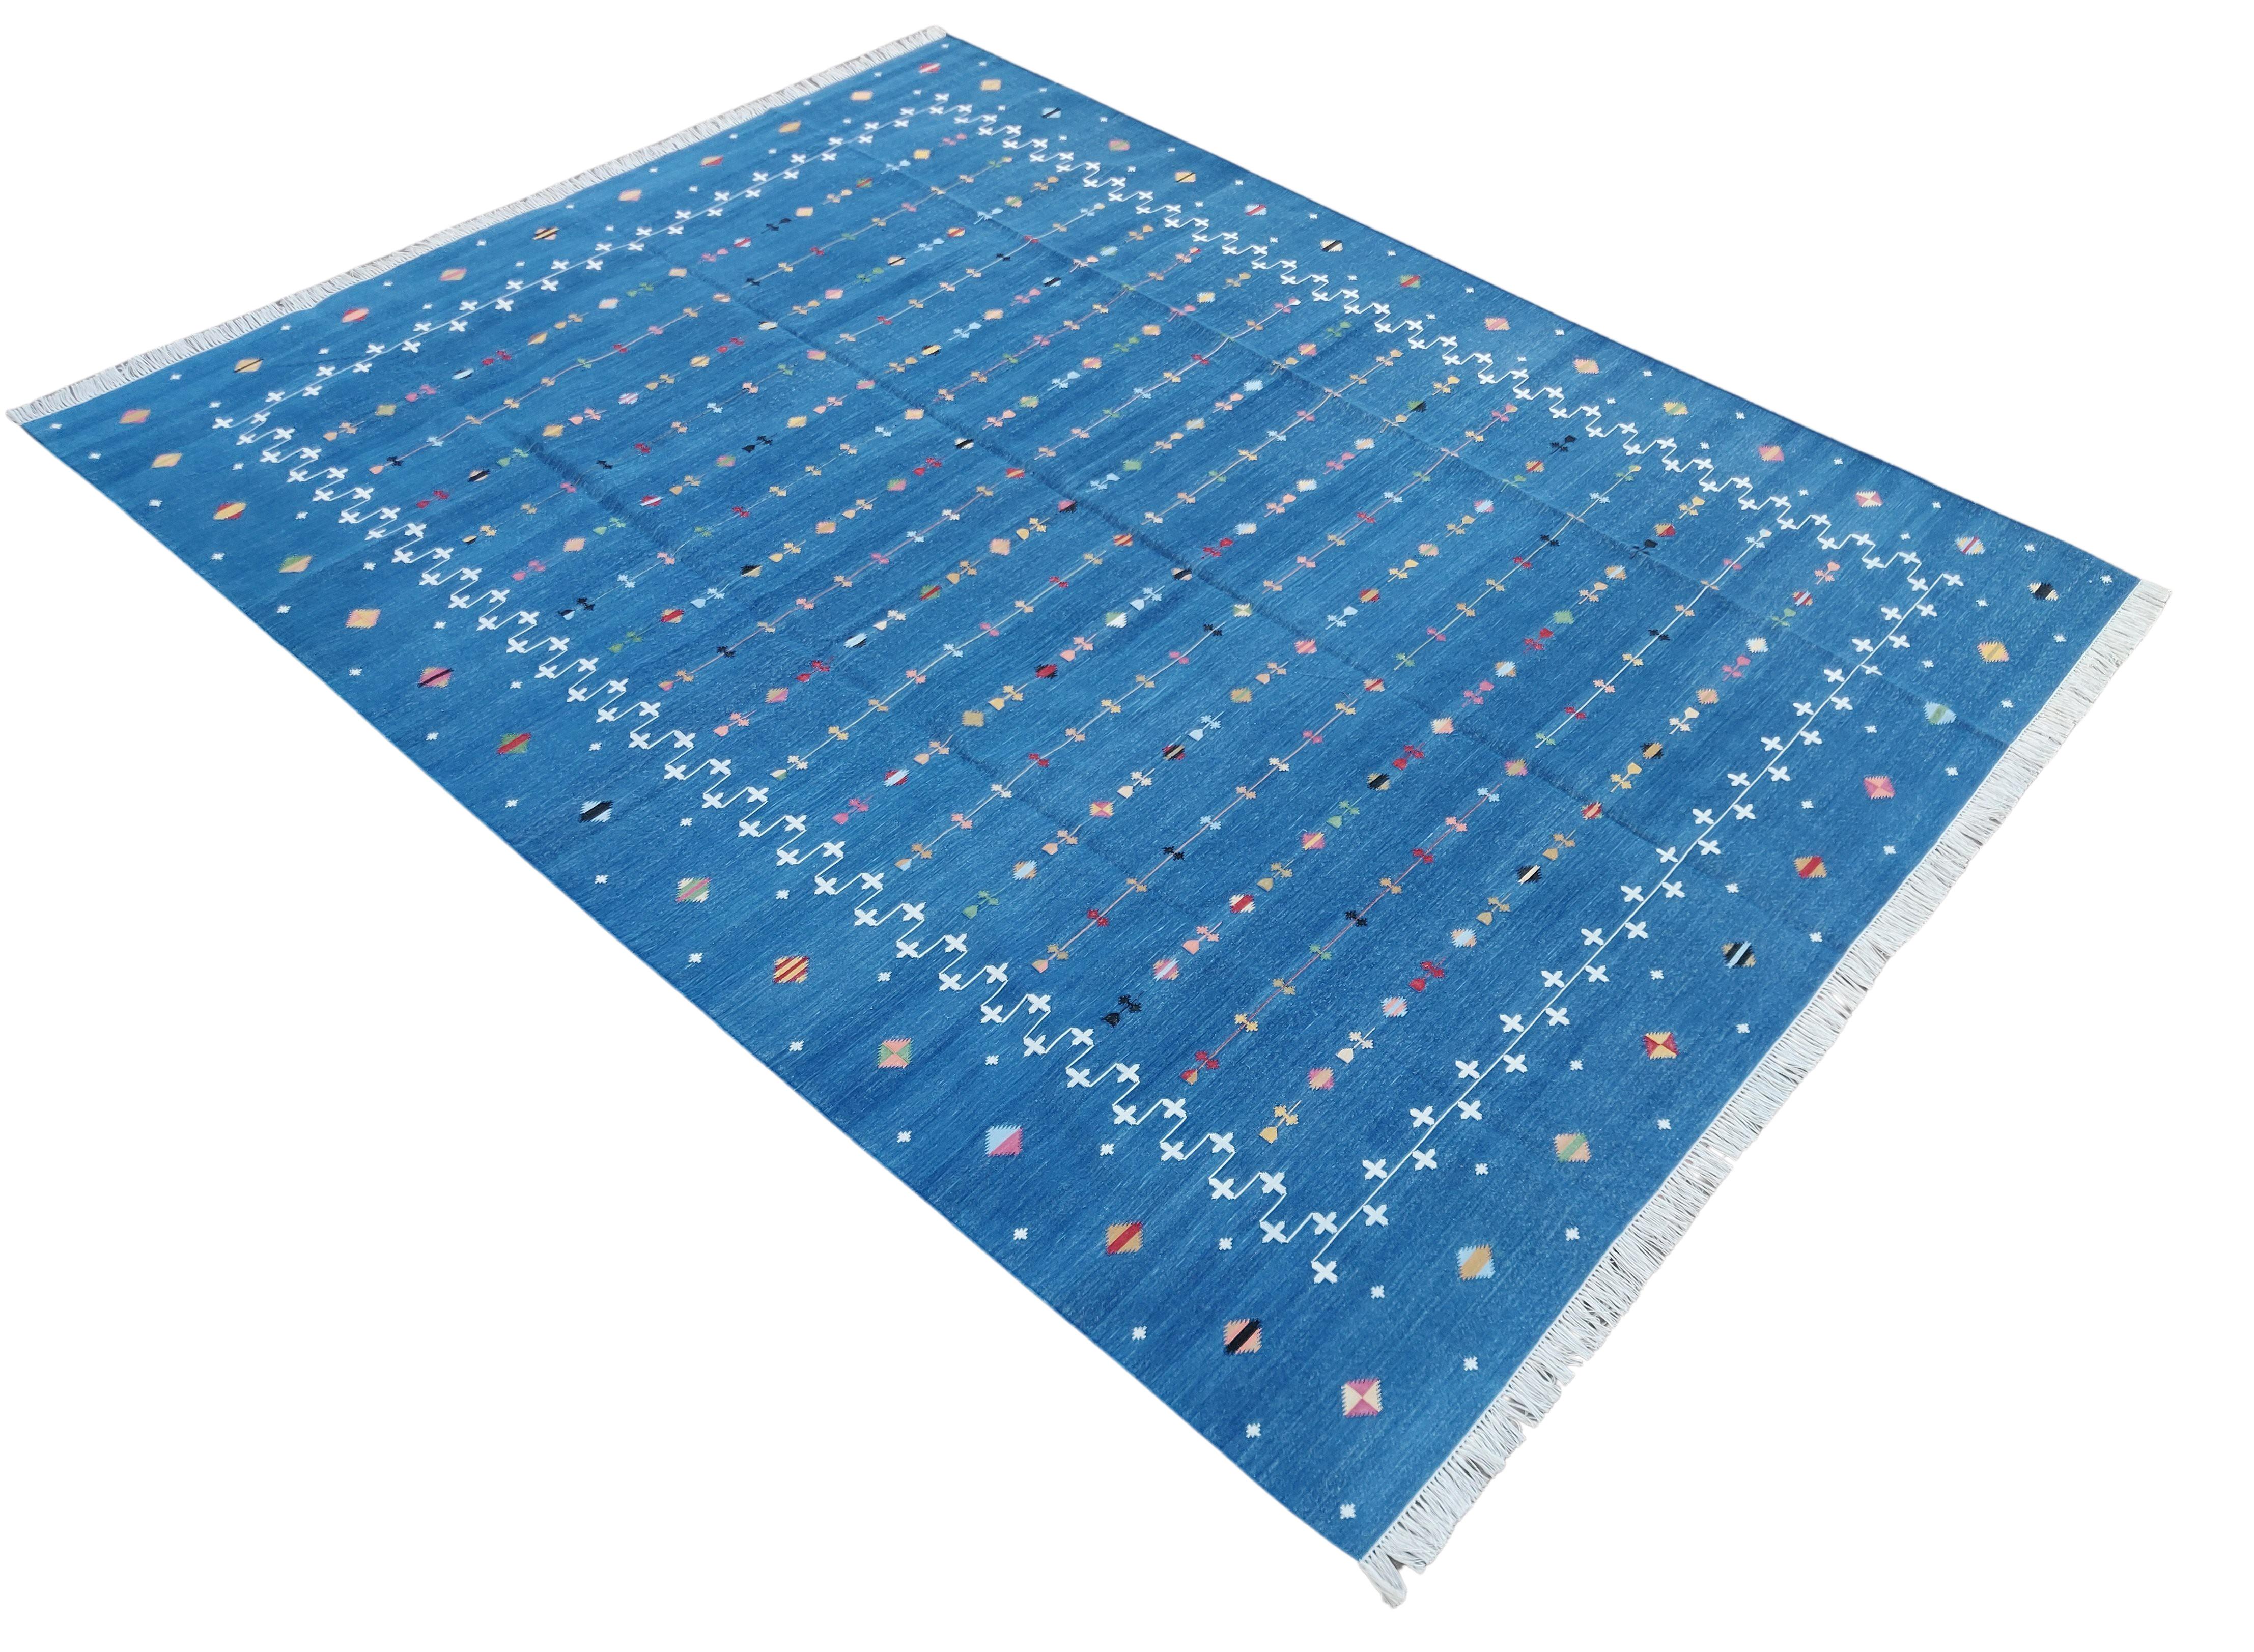 Cotton Vegetable Dyed Indigo Blue Shooting Star Rug-8'x10'
These special flat-weave dhurries are hand-woven with 15 ply 100% cotton yarn. Due to the special manufacturing techniques used to create our rugs, the size and color of each piece may vary